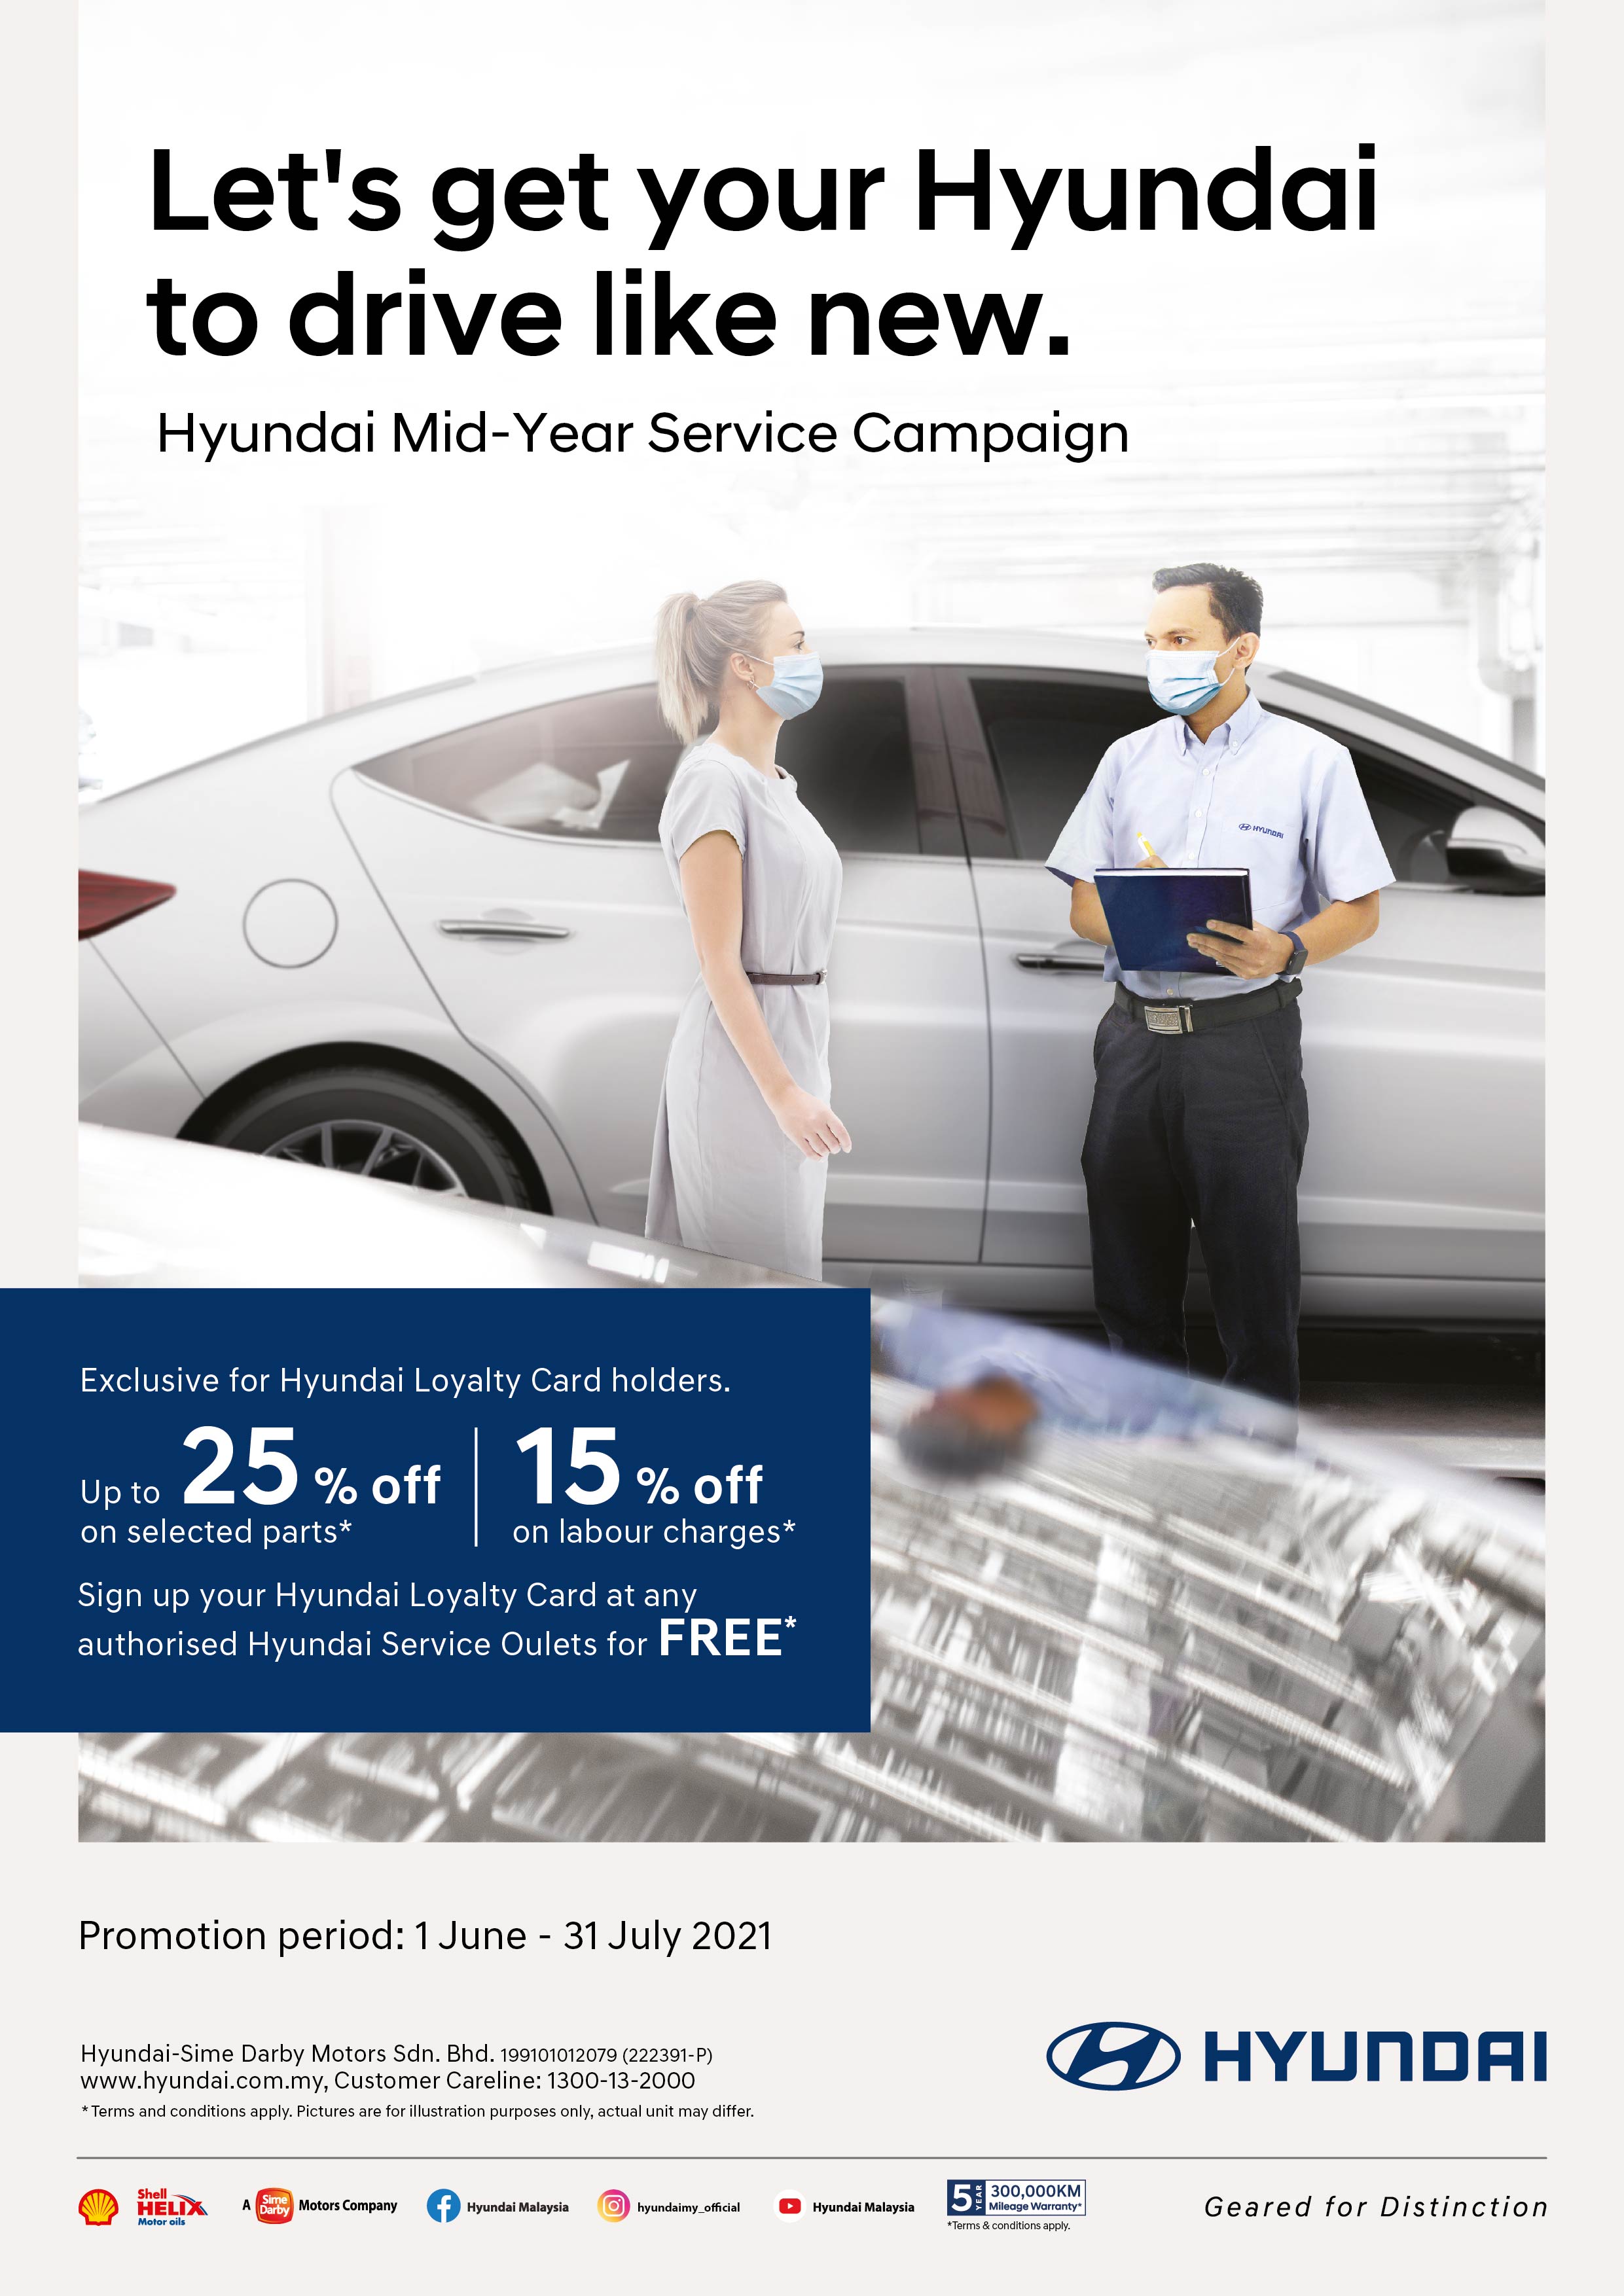 Let's get your Hyundai to drive like new. | Hyundai Mid-Year Service Campaign | Exclusive for Hyundai Loyalty Card holders. Up to 25% off on selected parts* | 15% off on labour charges* | Sign up your Hyundai Loyalty Card at any authorised Hyundai Service Outlets for FREE* | Promotion Period: 1 June - 31 July 2021. Terms & Conditions apply.